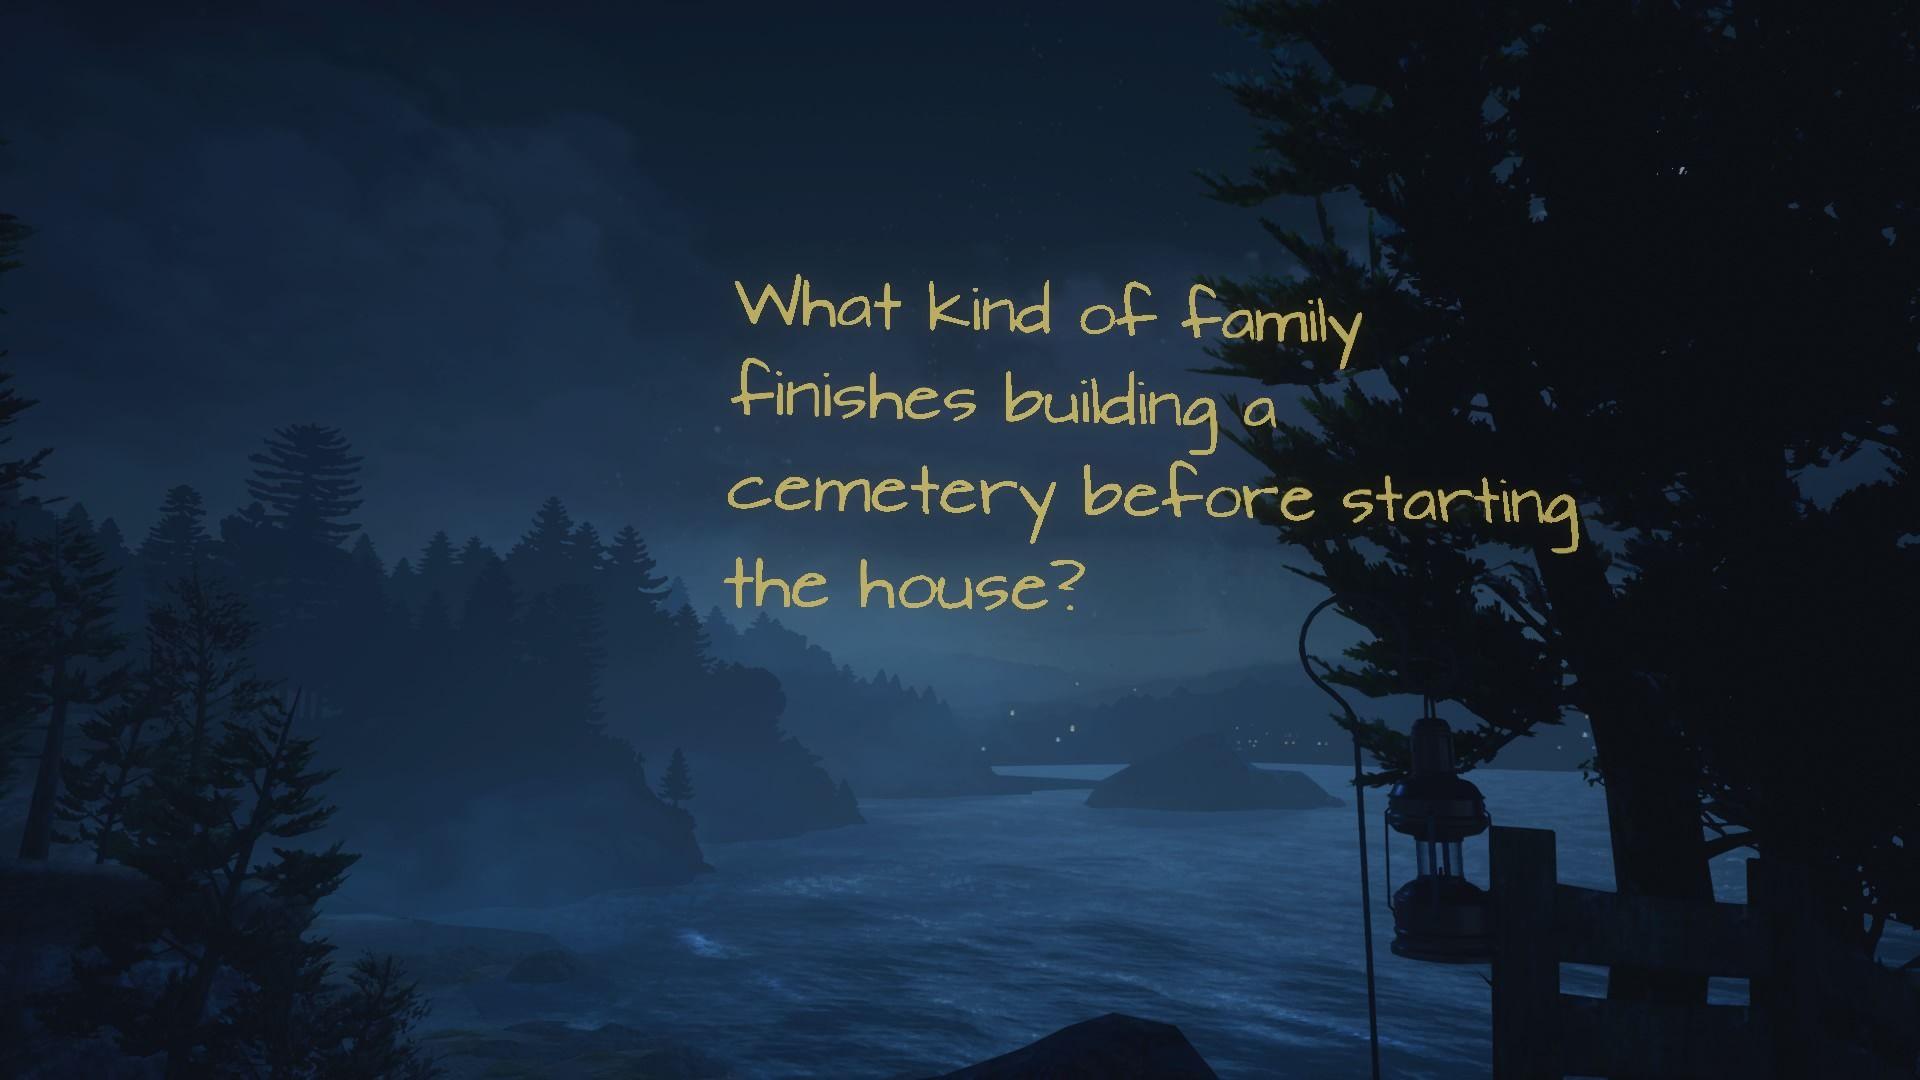 What Remains of Edith Finch Review